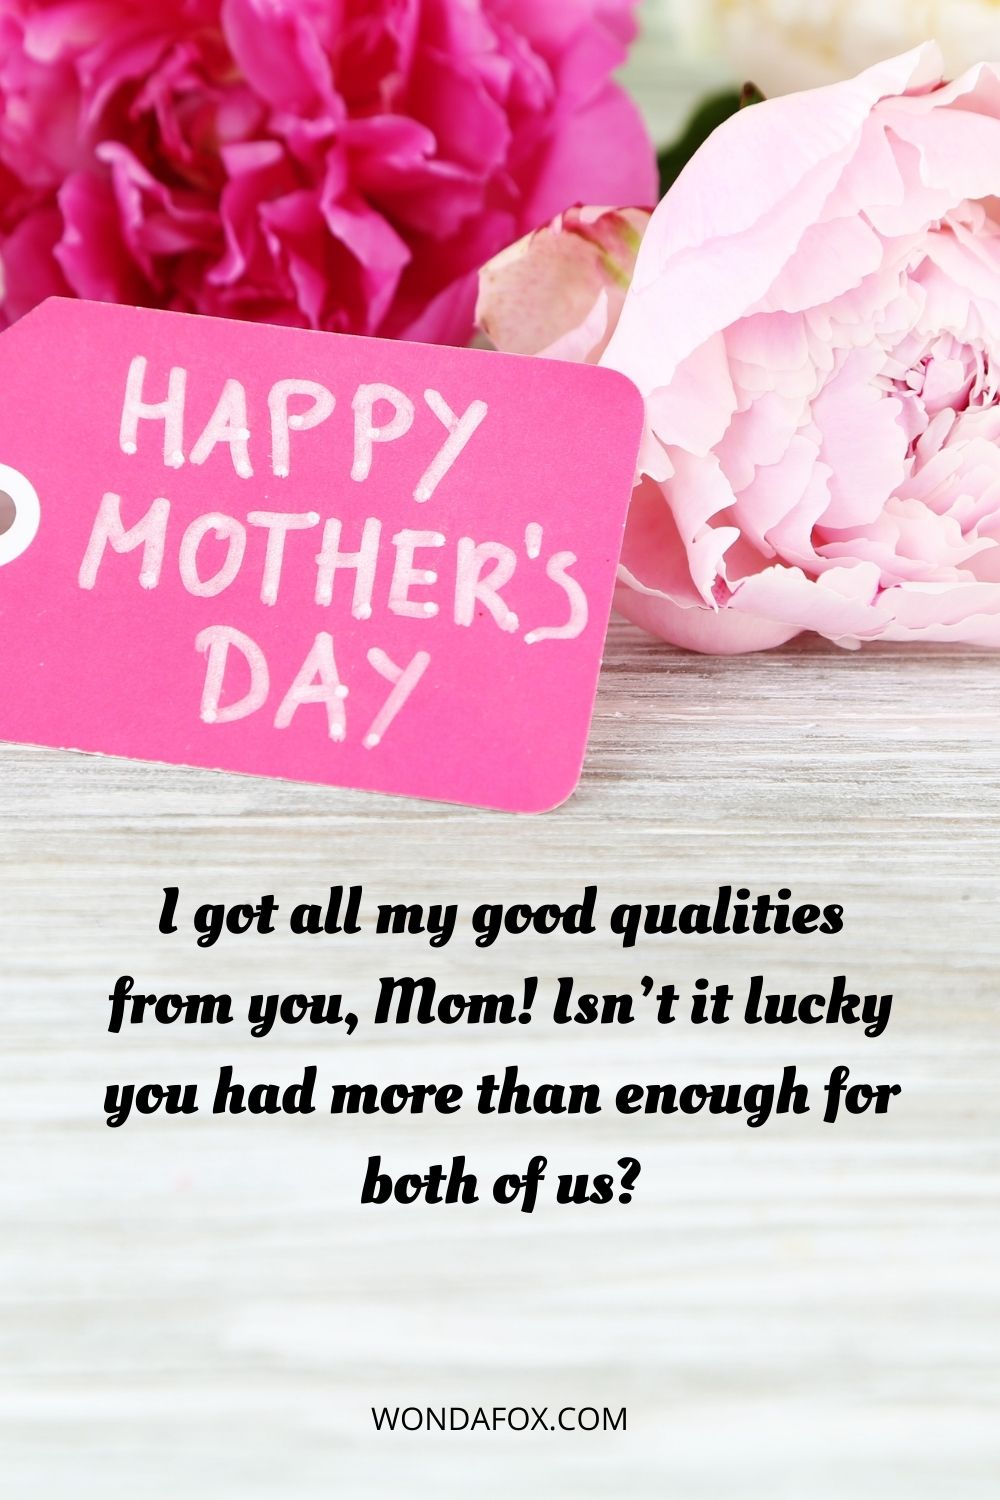 I got all my good qualities from you, Mom! Isn’t it lucky you had more than enough for both of us?